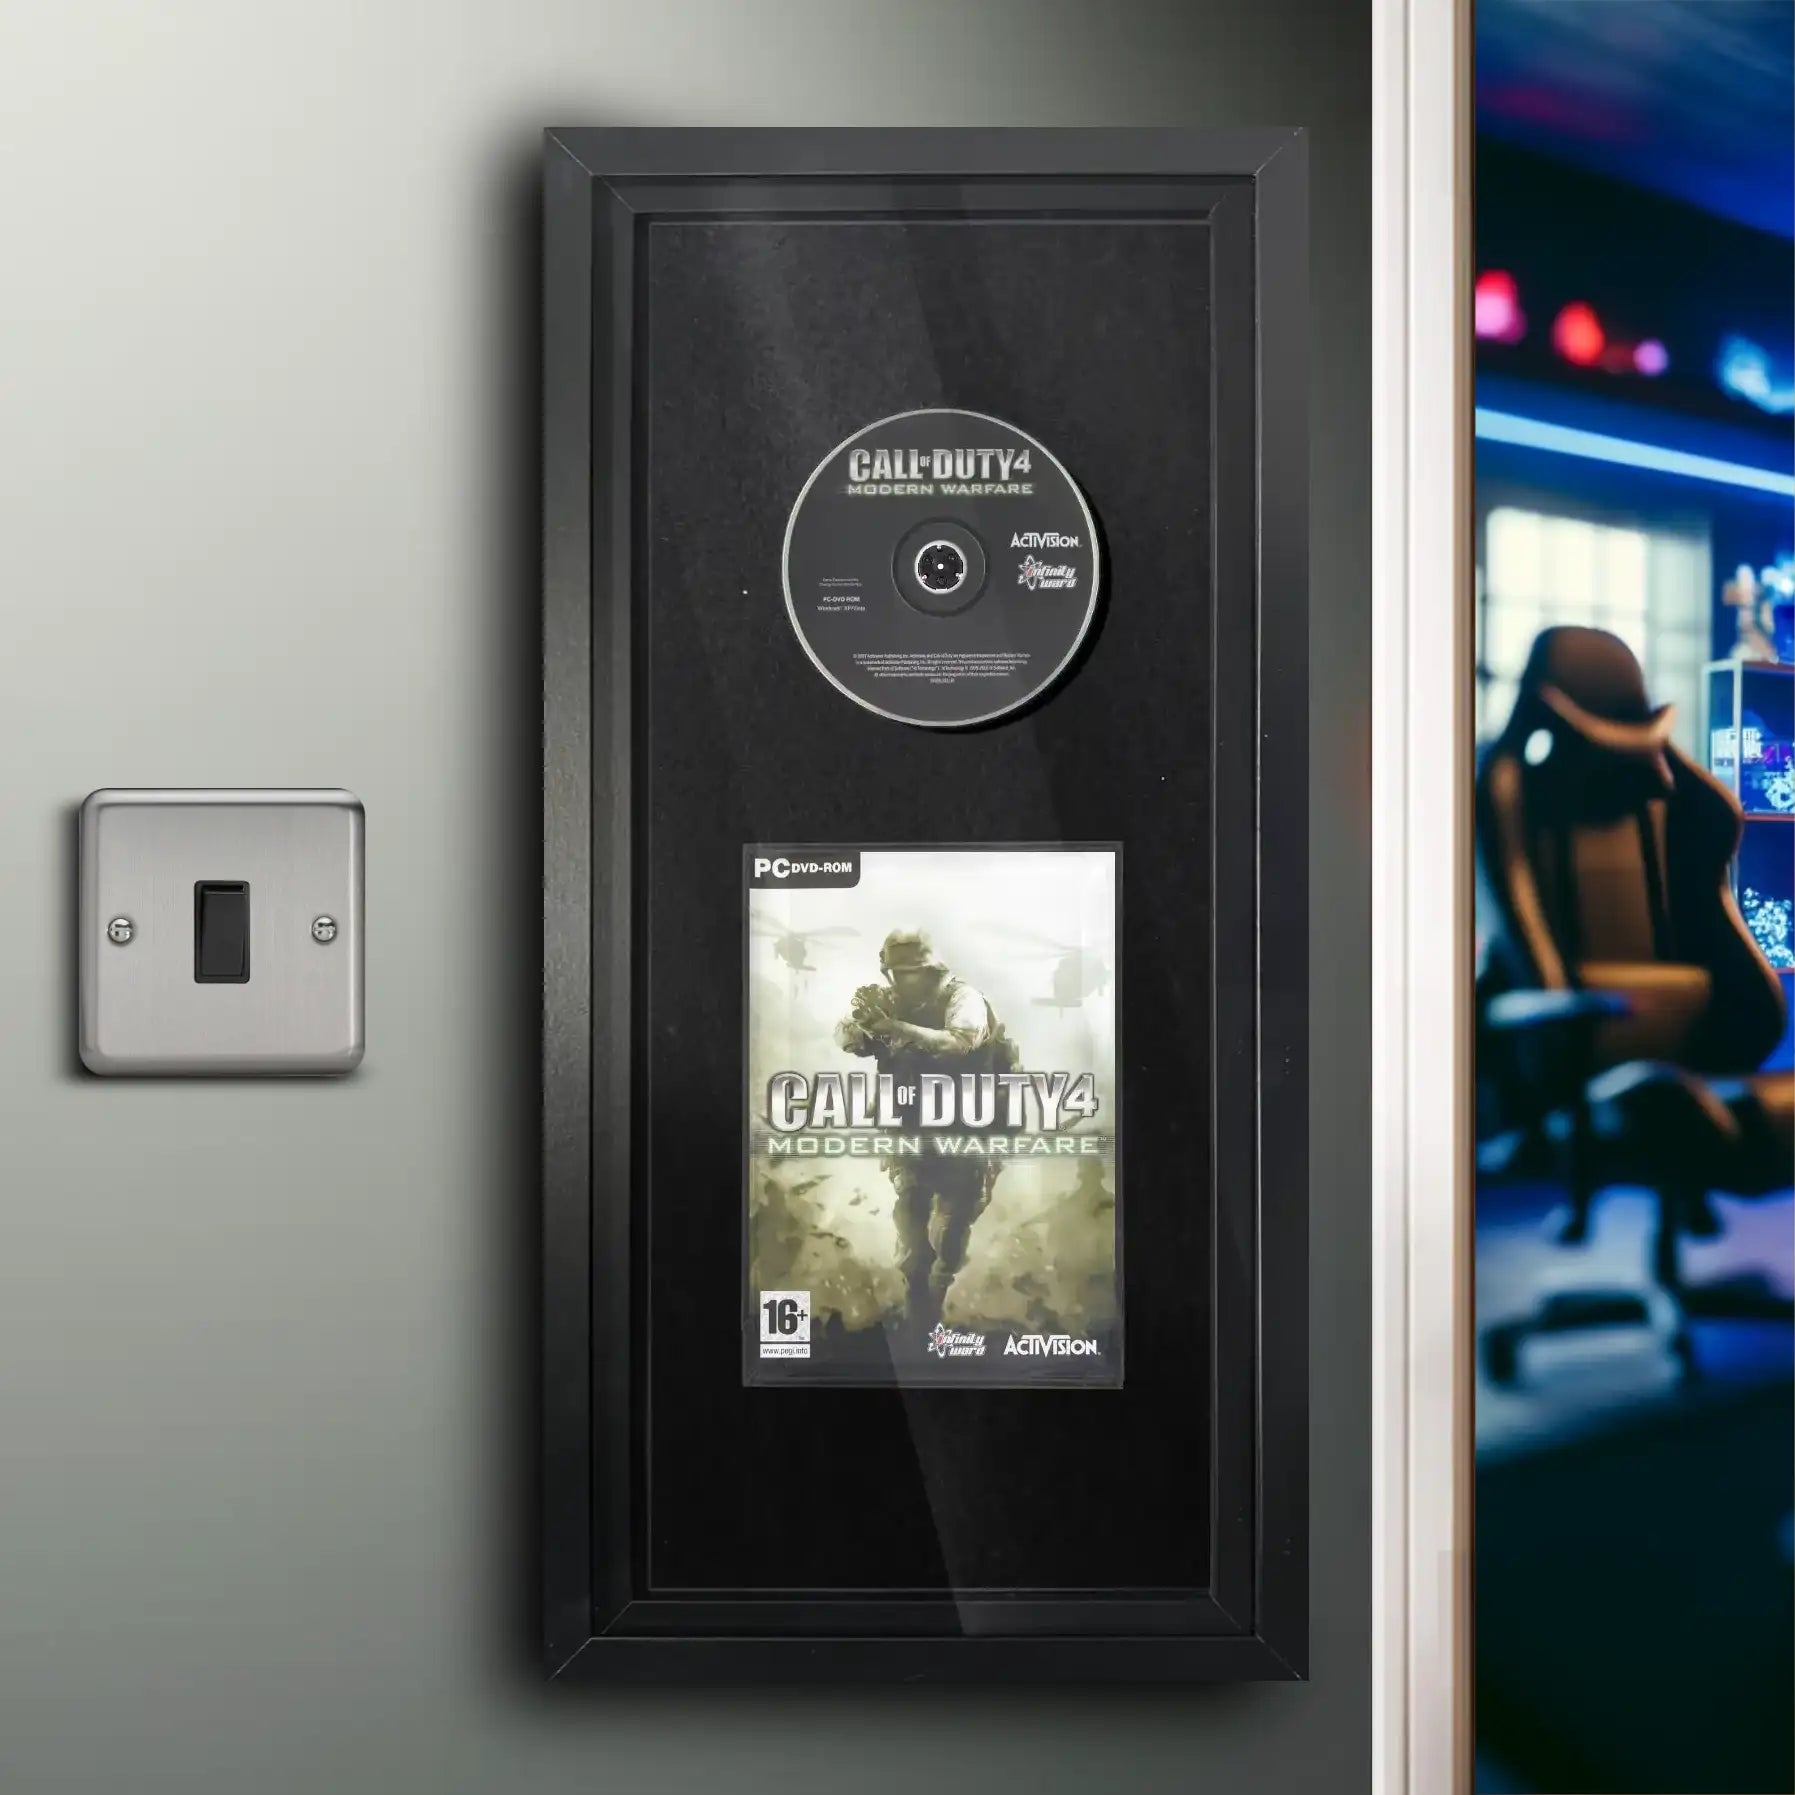 Frame your Window PC rom video game with this frame. Inside is Call of Duty 4 Modern Warfare displayed using a slipcase and spindle